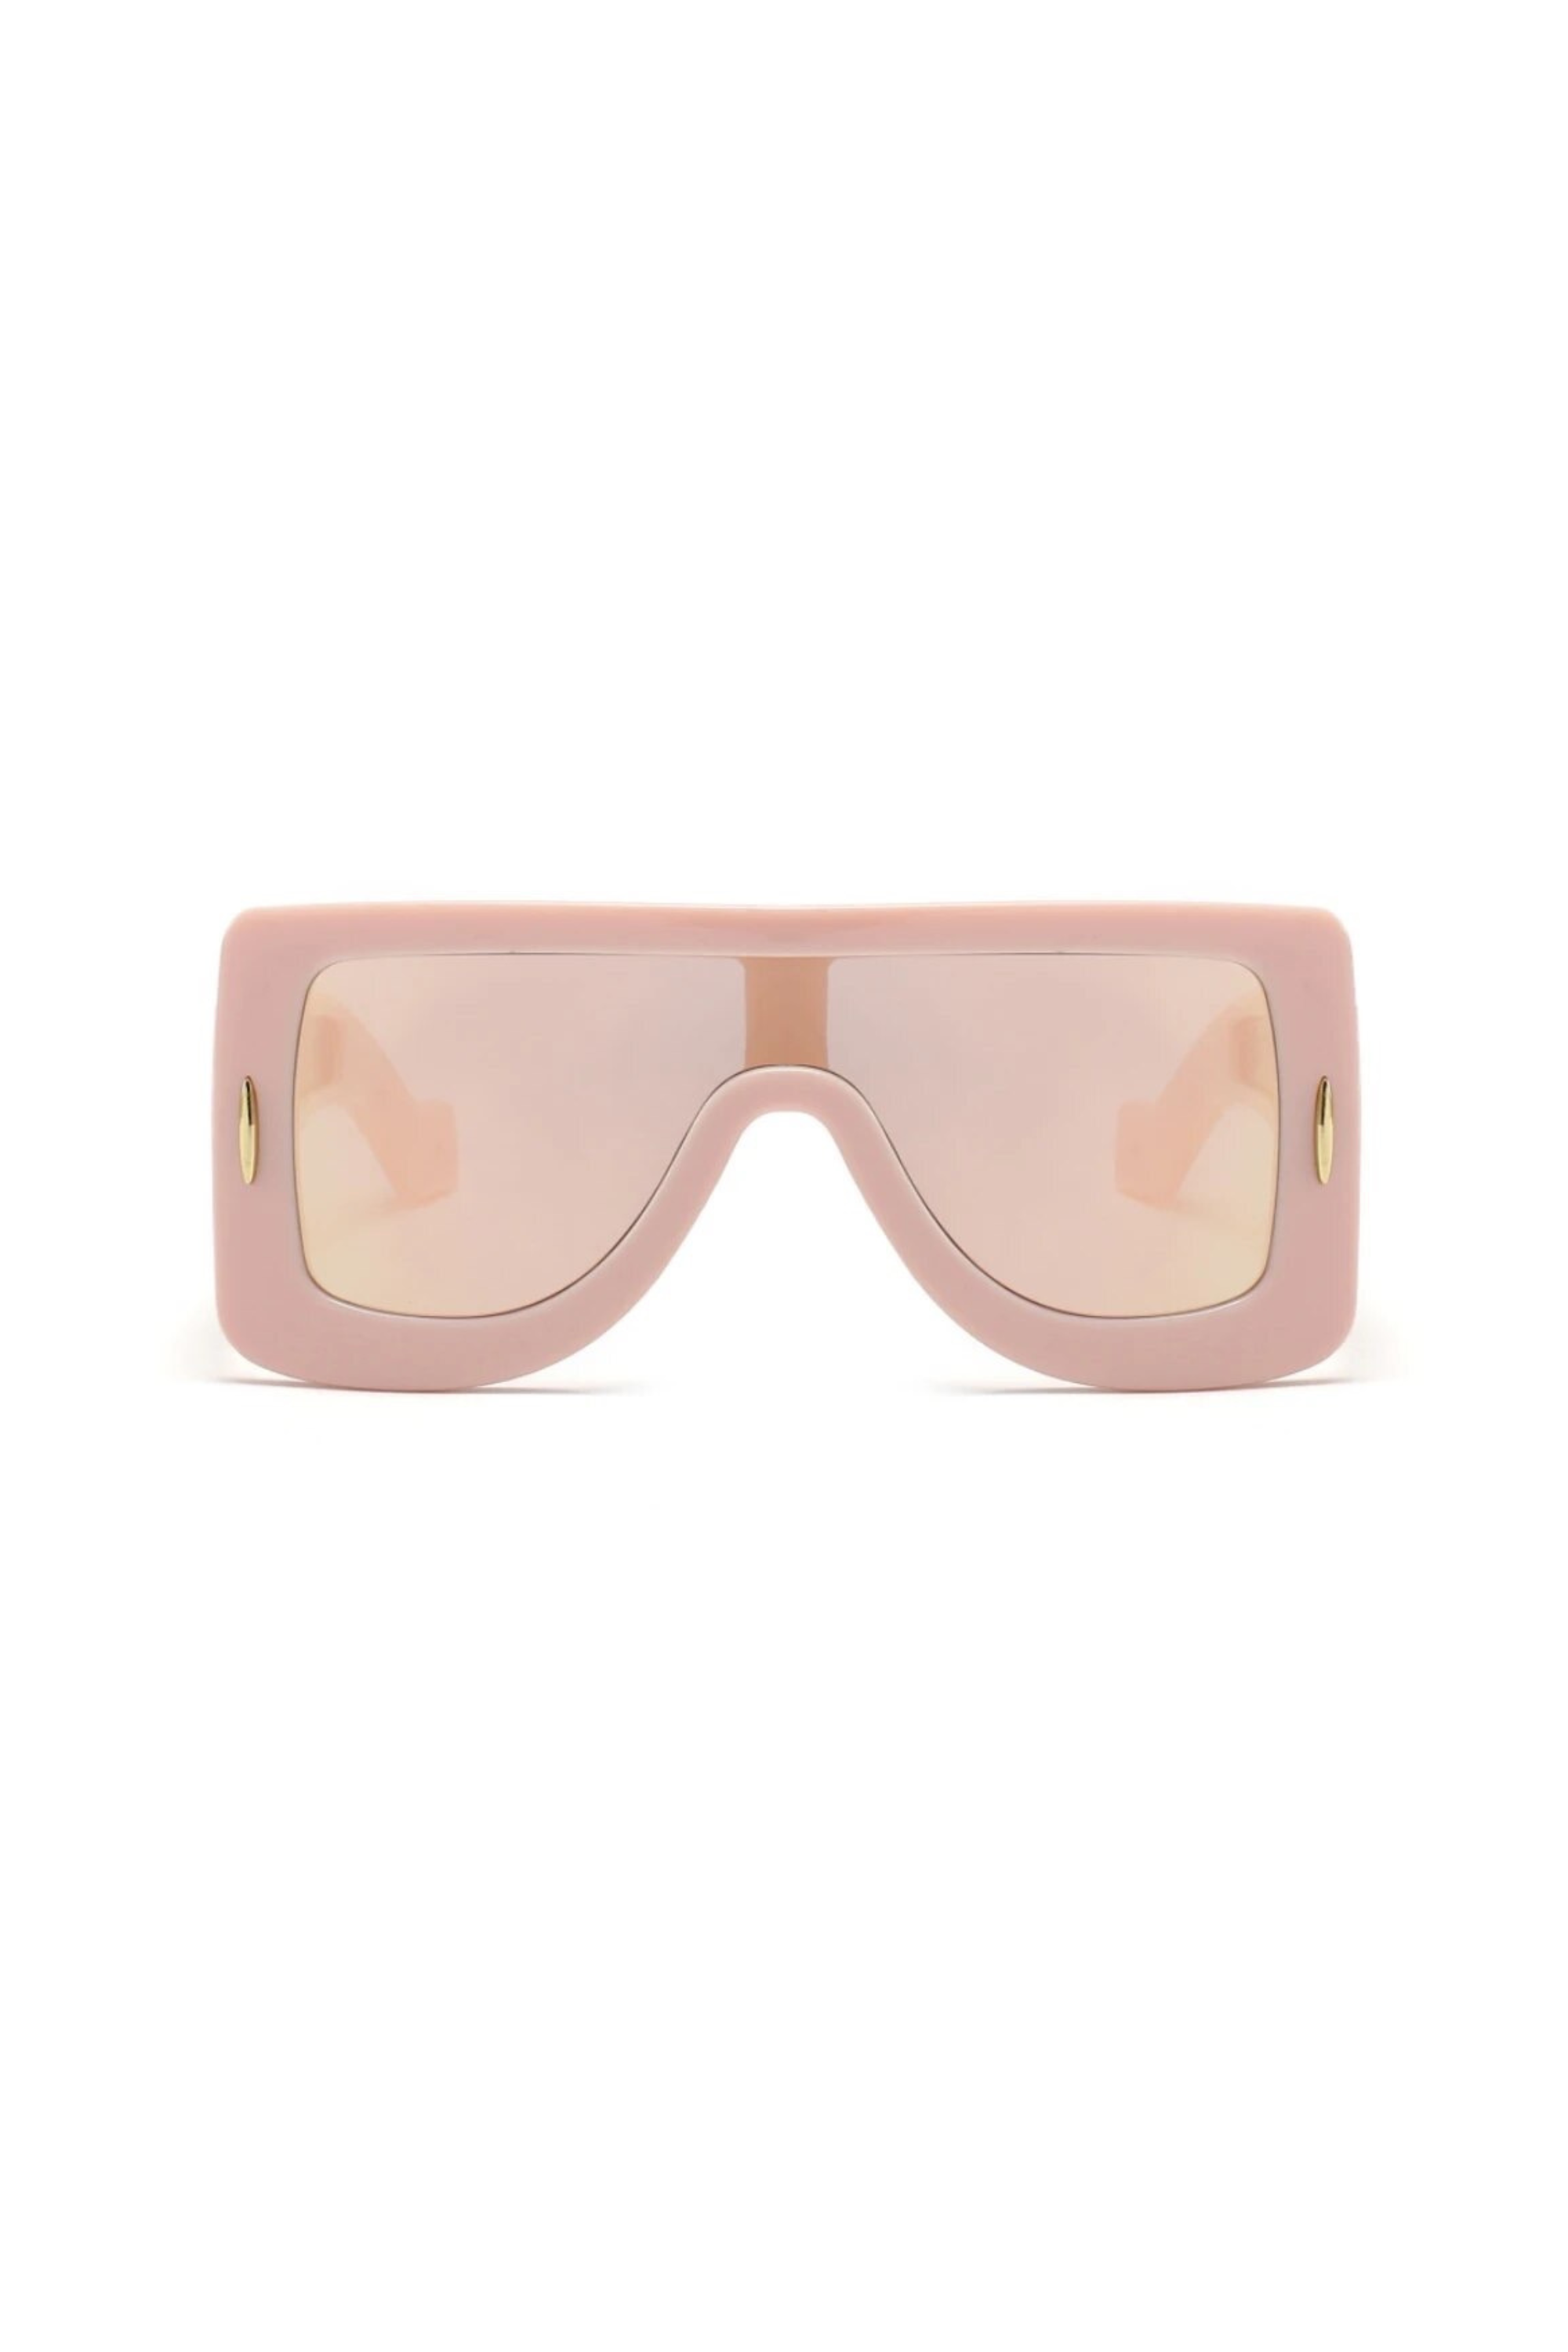 GOLDxTEAL modern pink oversized square frame sunglasses.